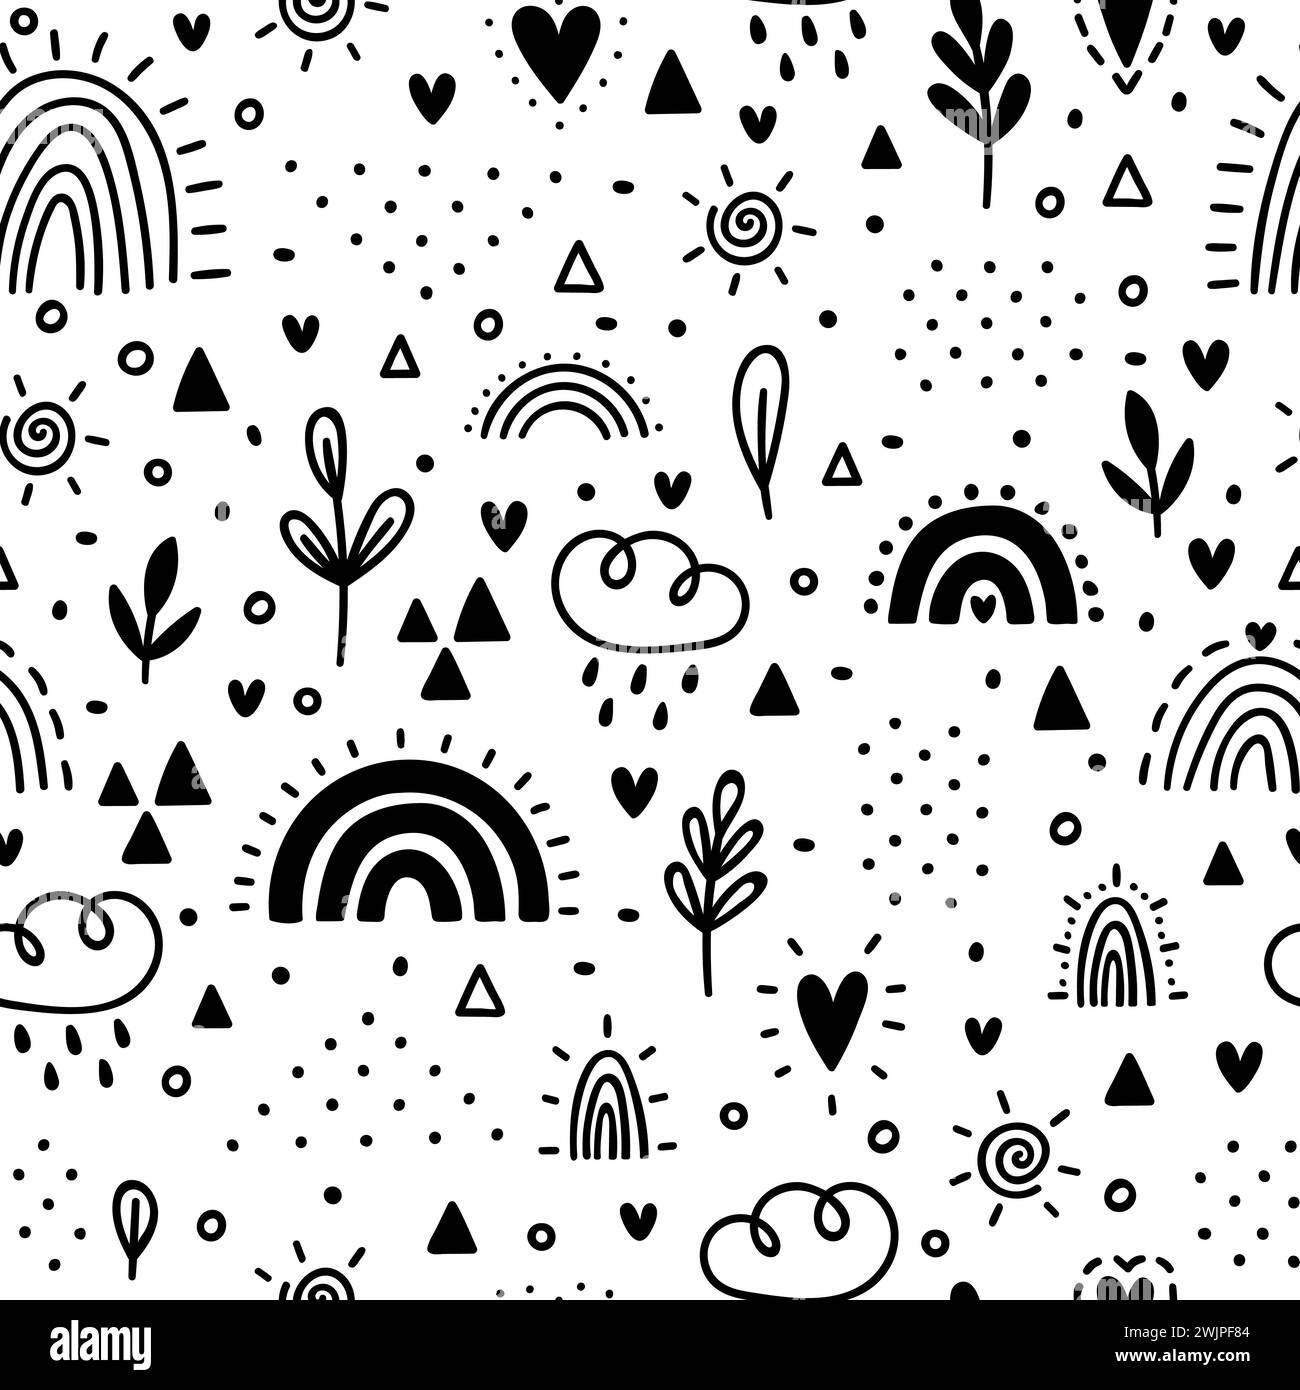 Hand drawn seamless pattern. Childish background with rainbows. Trendy texture for fabric, textile, cloth, wrapping paper. Nursery design for kids. Ve Stock Vector